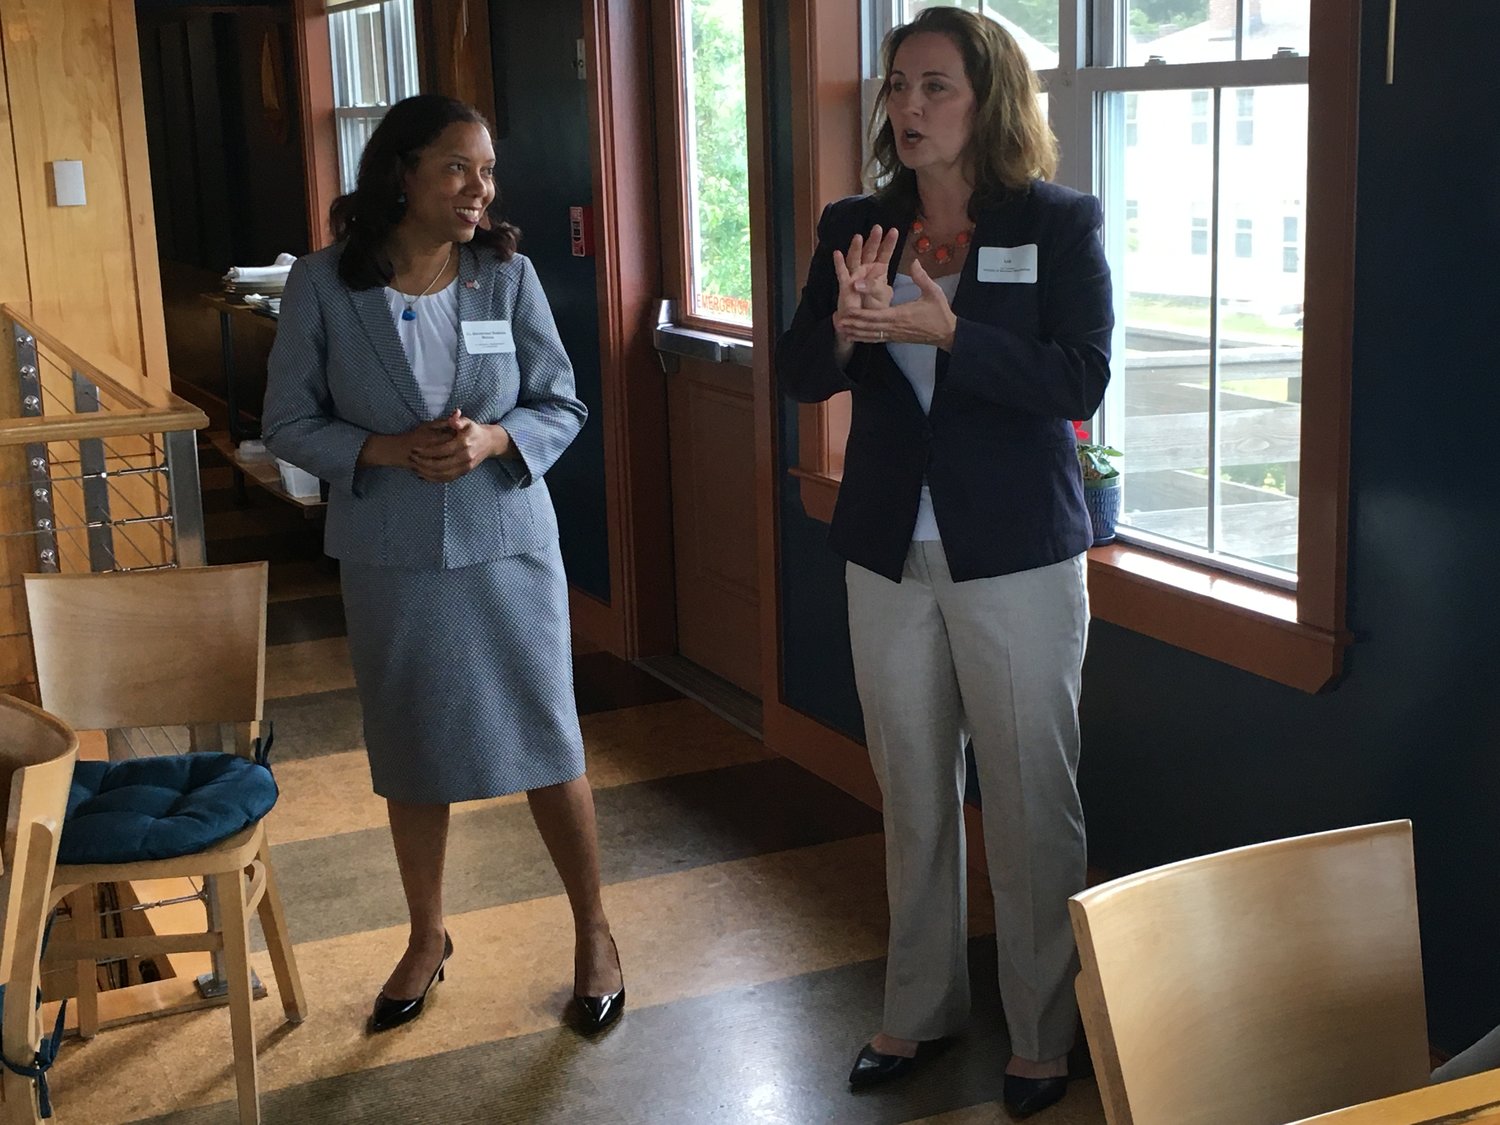 Lt. Gov. Sabina Matos (left) and newly appointed Commerce Secretary Liz Tanner (she wasn’t when this photo was taken, but she is now) answer questions from the audience during a “Coffee and Commerce” event at Trafford restaurant on Friday morning.